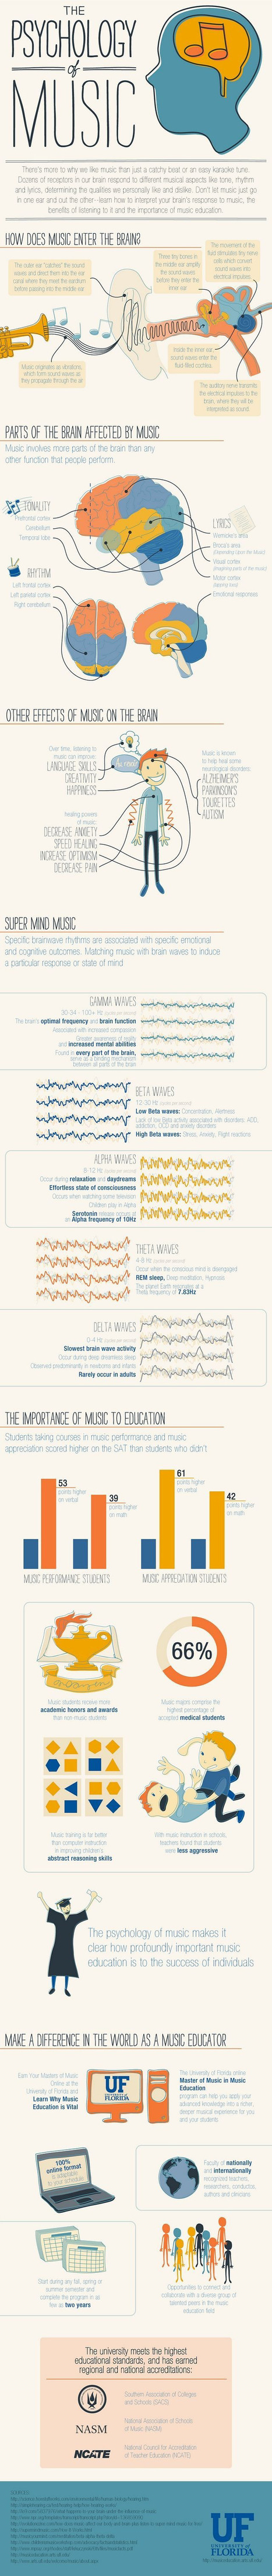 A Wonderful Graphic Featuring The Importance of Music in Education [Infographic] | Aprendiendo a Distancia | Scoop.it